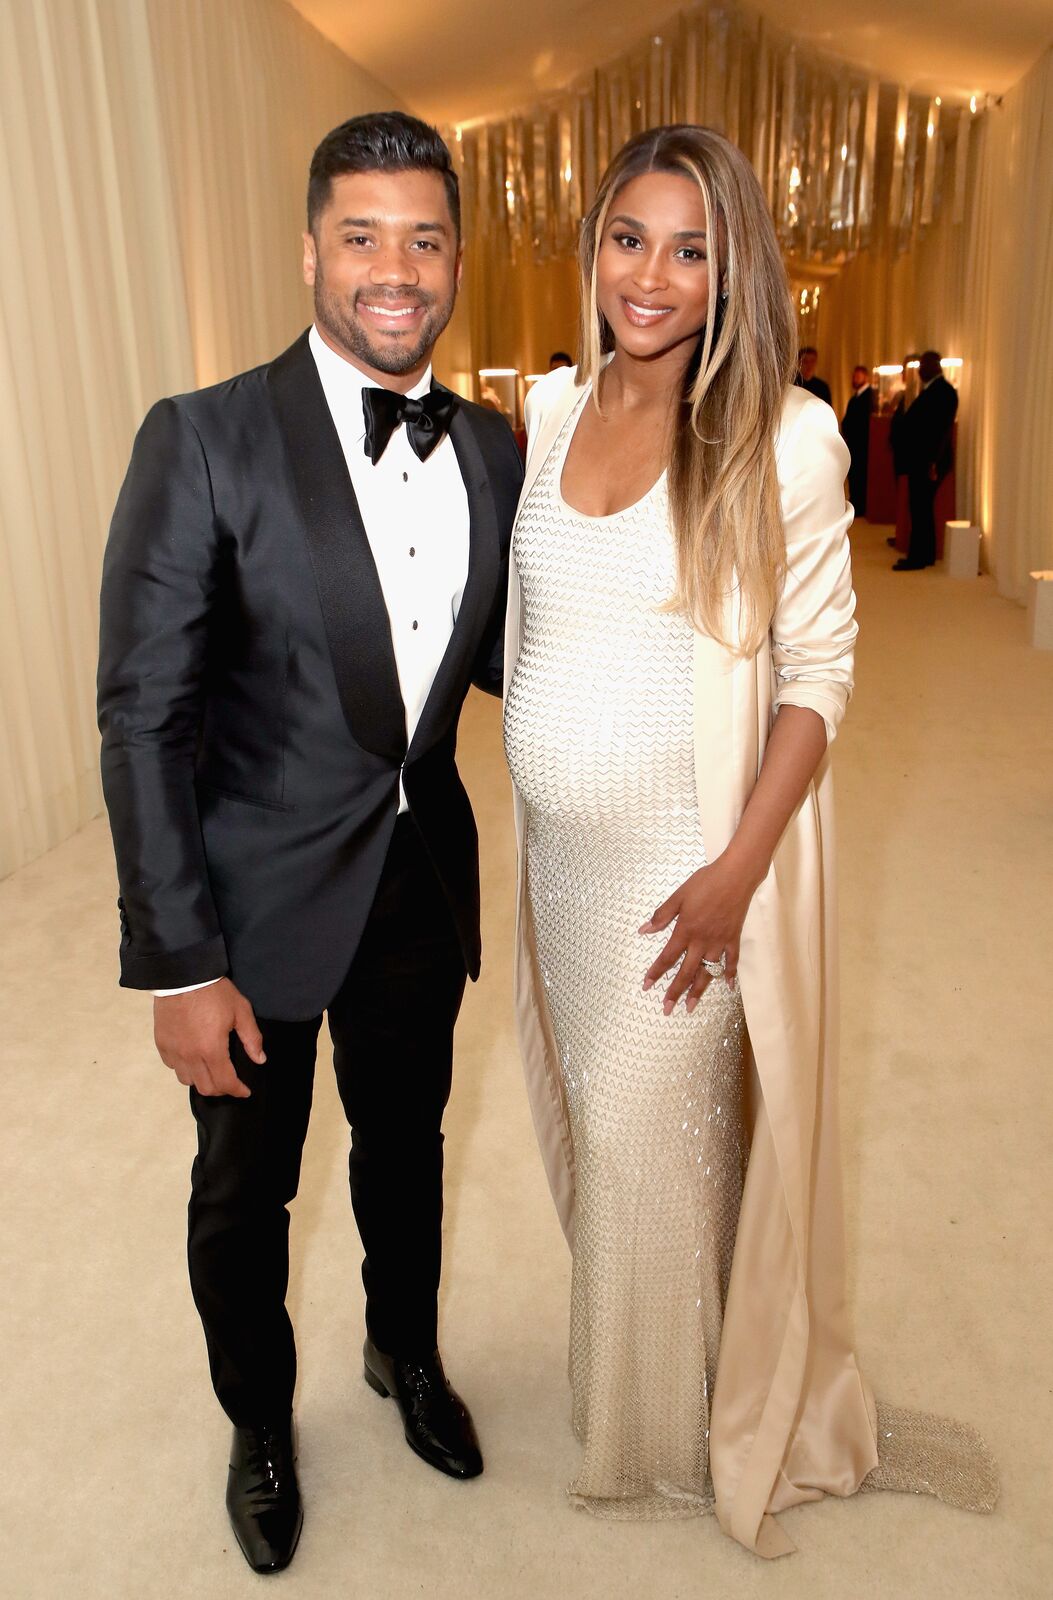 Football player Russell Wilson (L) and singer Ciara attend the 25th Annual Elton John AIDS Foundation's Academy Awards Viewing Party at The City of West Hollywood Park on February 26, 2017 | Photo Getty Images